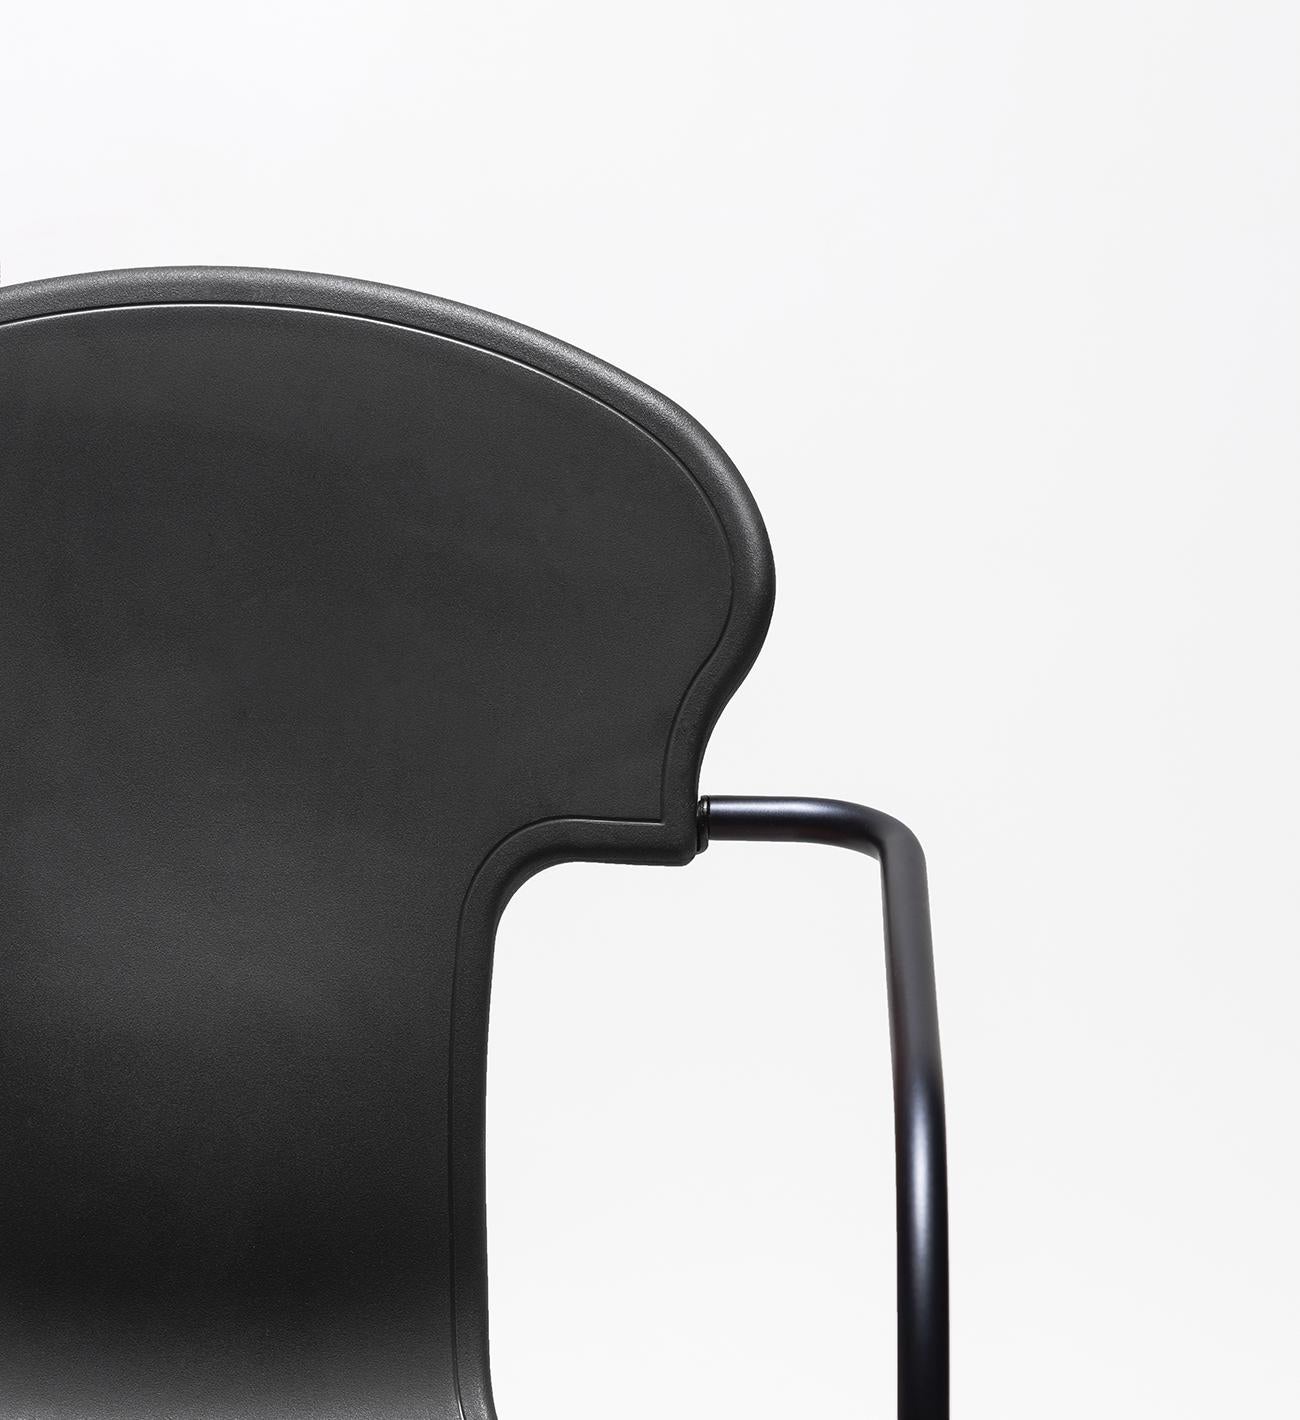 In 2008 Oscar Tusquets reviewed his famous Various chair design, and came up with this smaller and updated version presented in a painted Anodic Black.

The seat is available in a white or black gas injected polypropylene and upholstered in BD